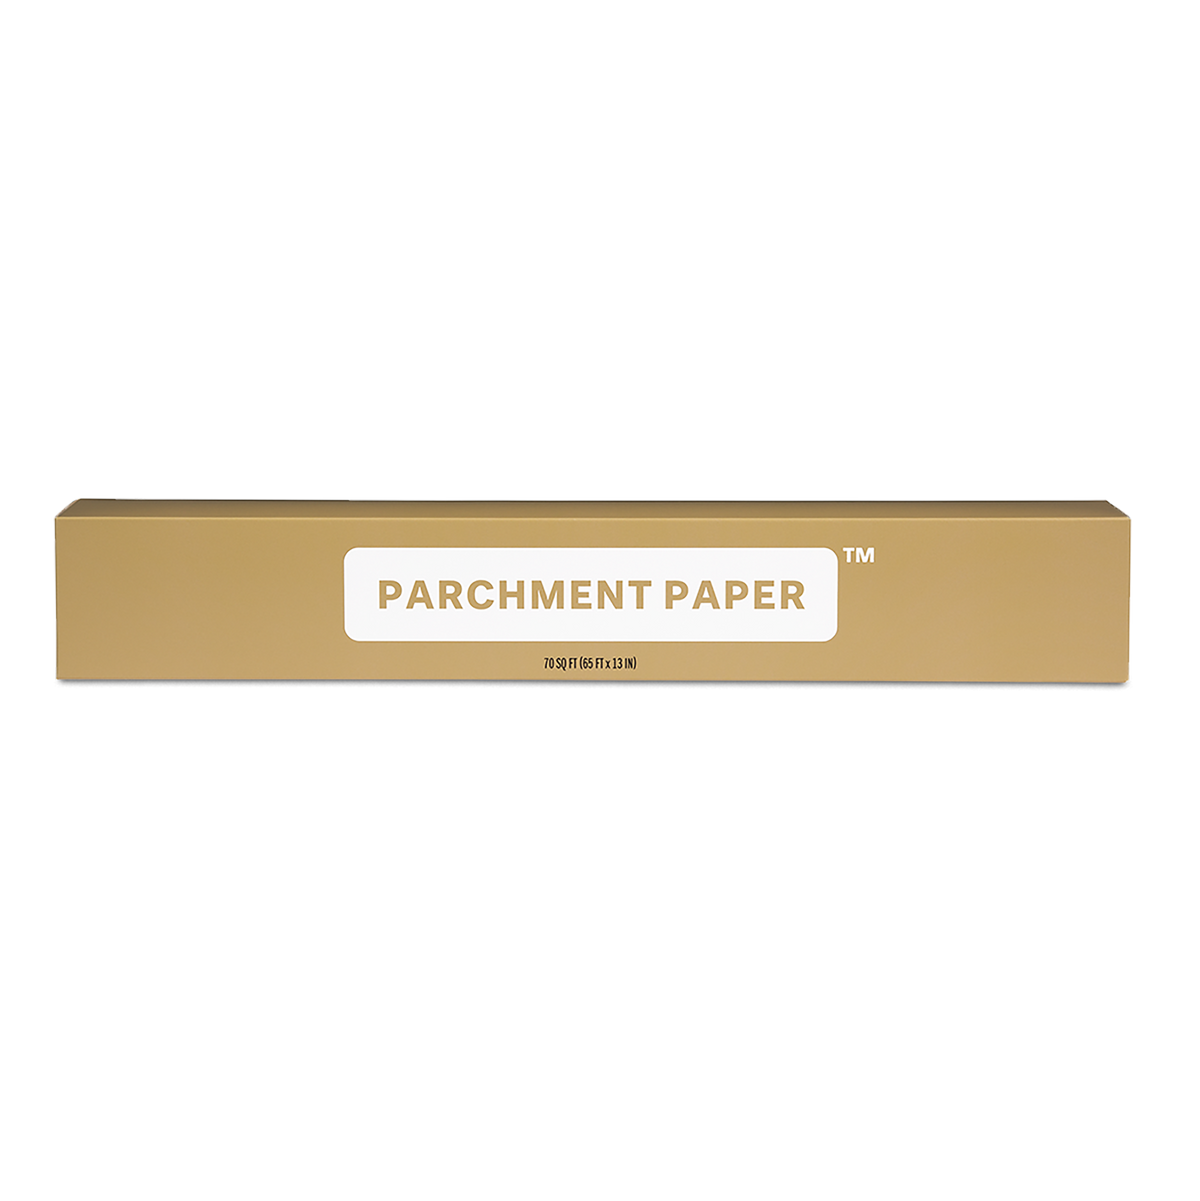 Product photo, front of box showing the product name: parchment paper.